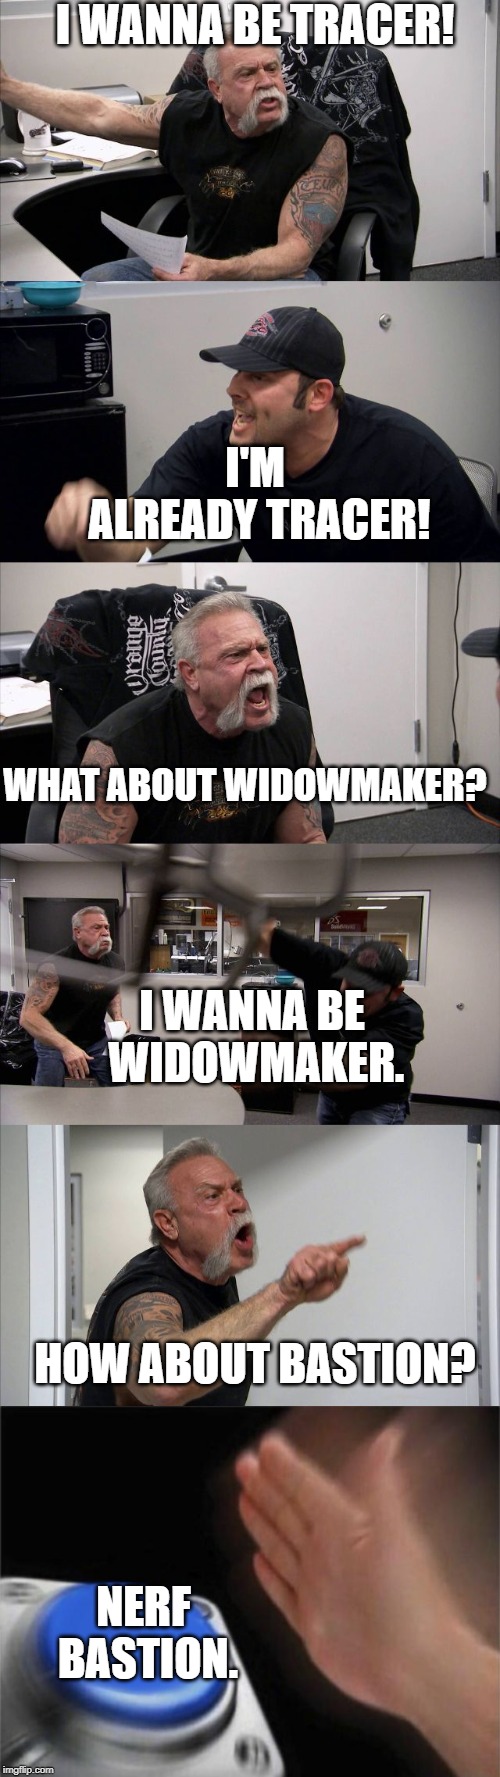  I WANNA BE TRACER! I'M ALREADY TRACER! WHAT ABOUT WIDOWMAKER? I WANNA BE WIDOWMAKER. HOW ABOUT BASTION? NERF BASTION. | image tagged in memes,blank nut button,american chopper argument | made w/ Imgflip meme maker